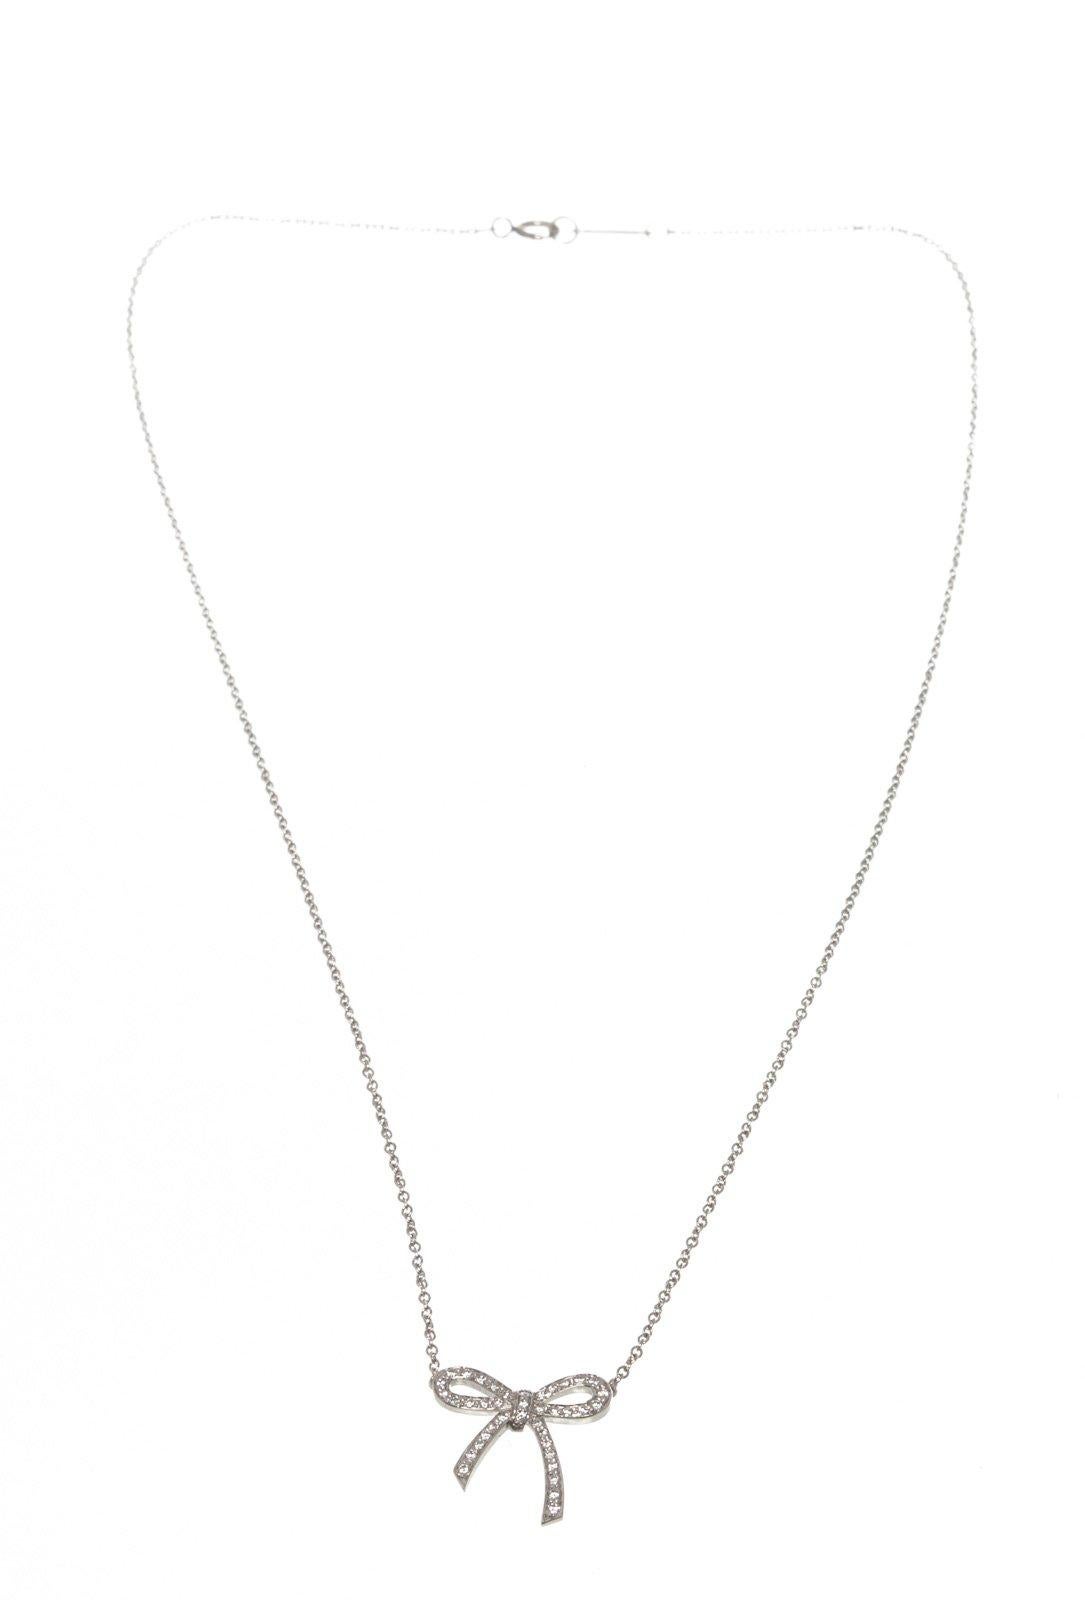 Tiffany & Co. Silver Bow Pendant Necklace with silver-tone hardware.

52969MSC  